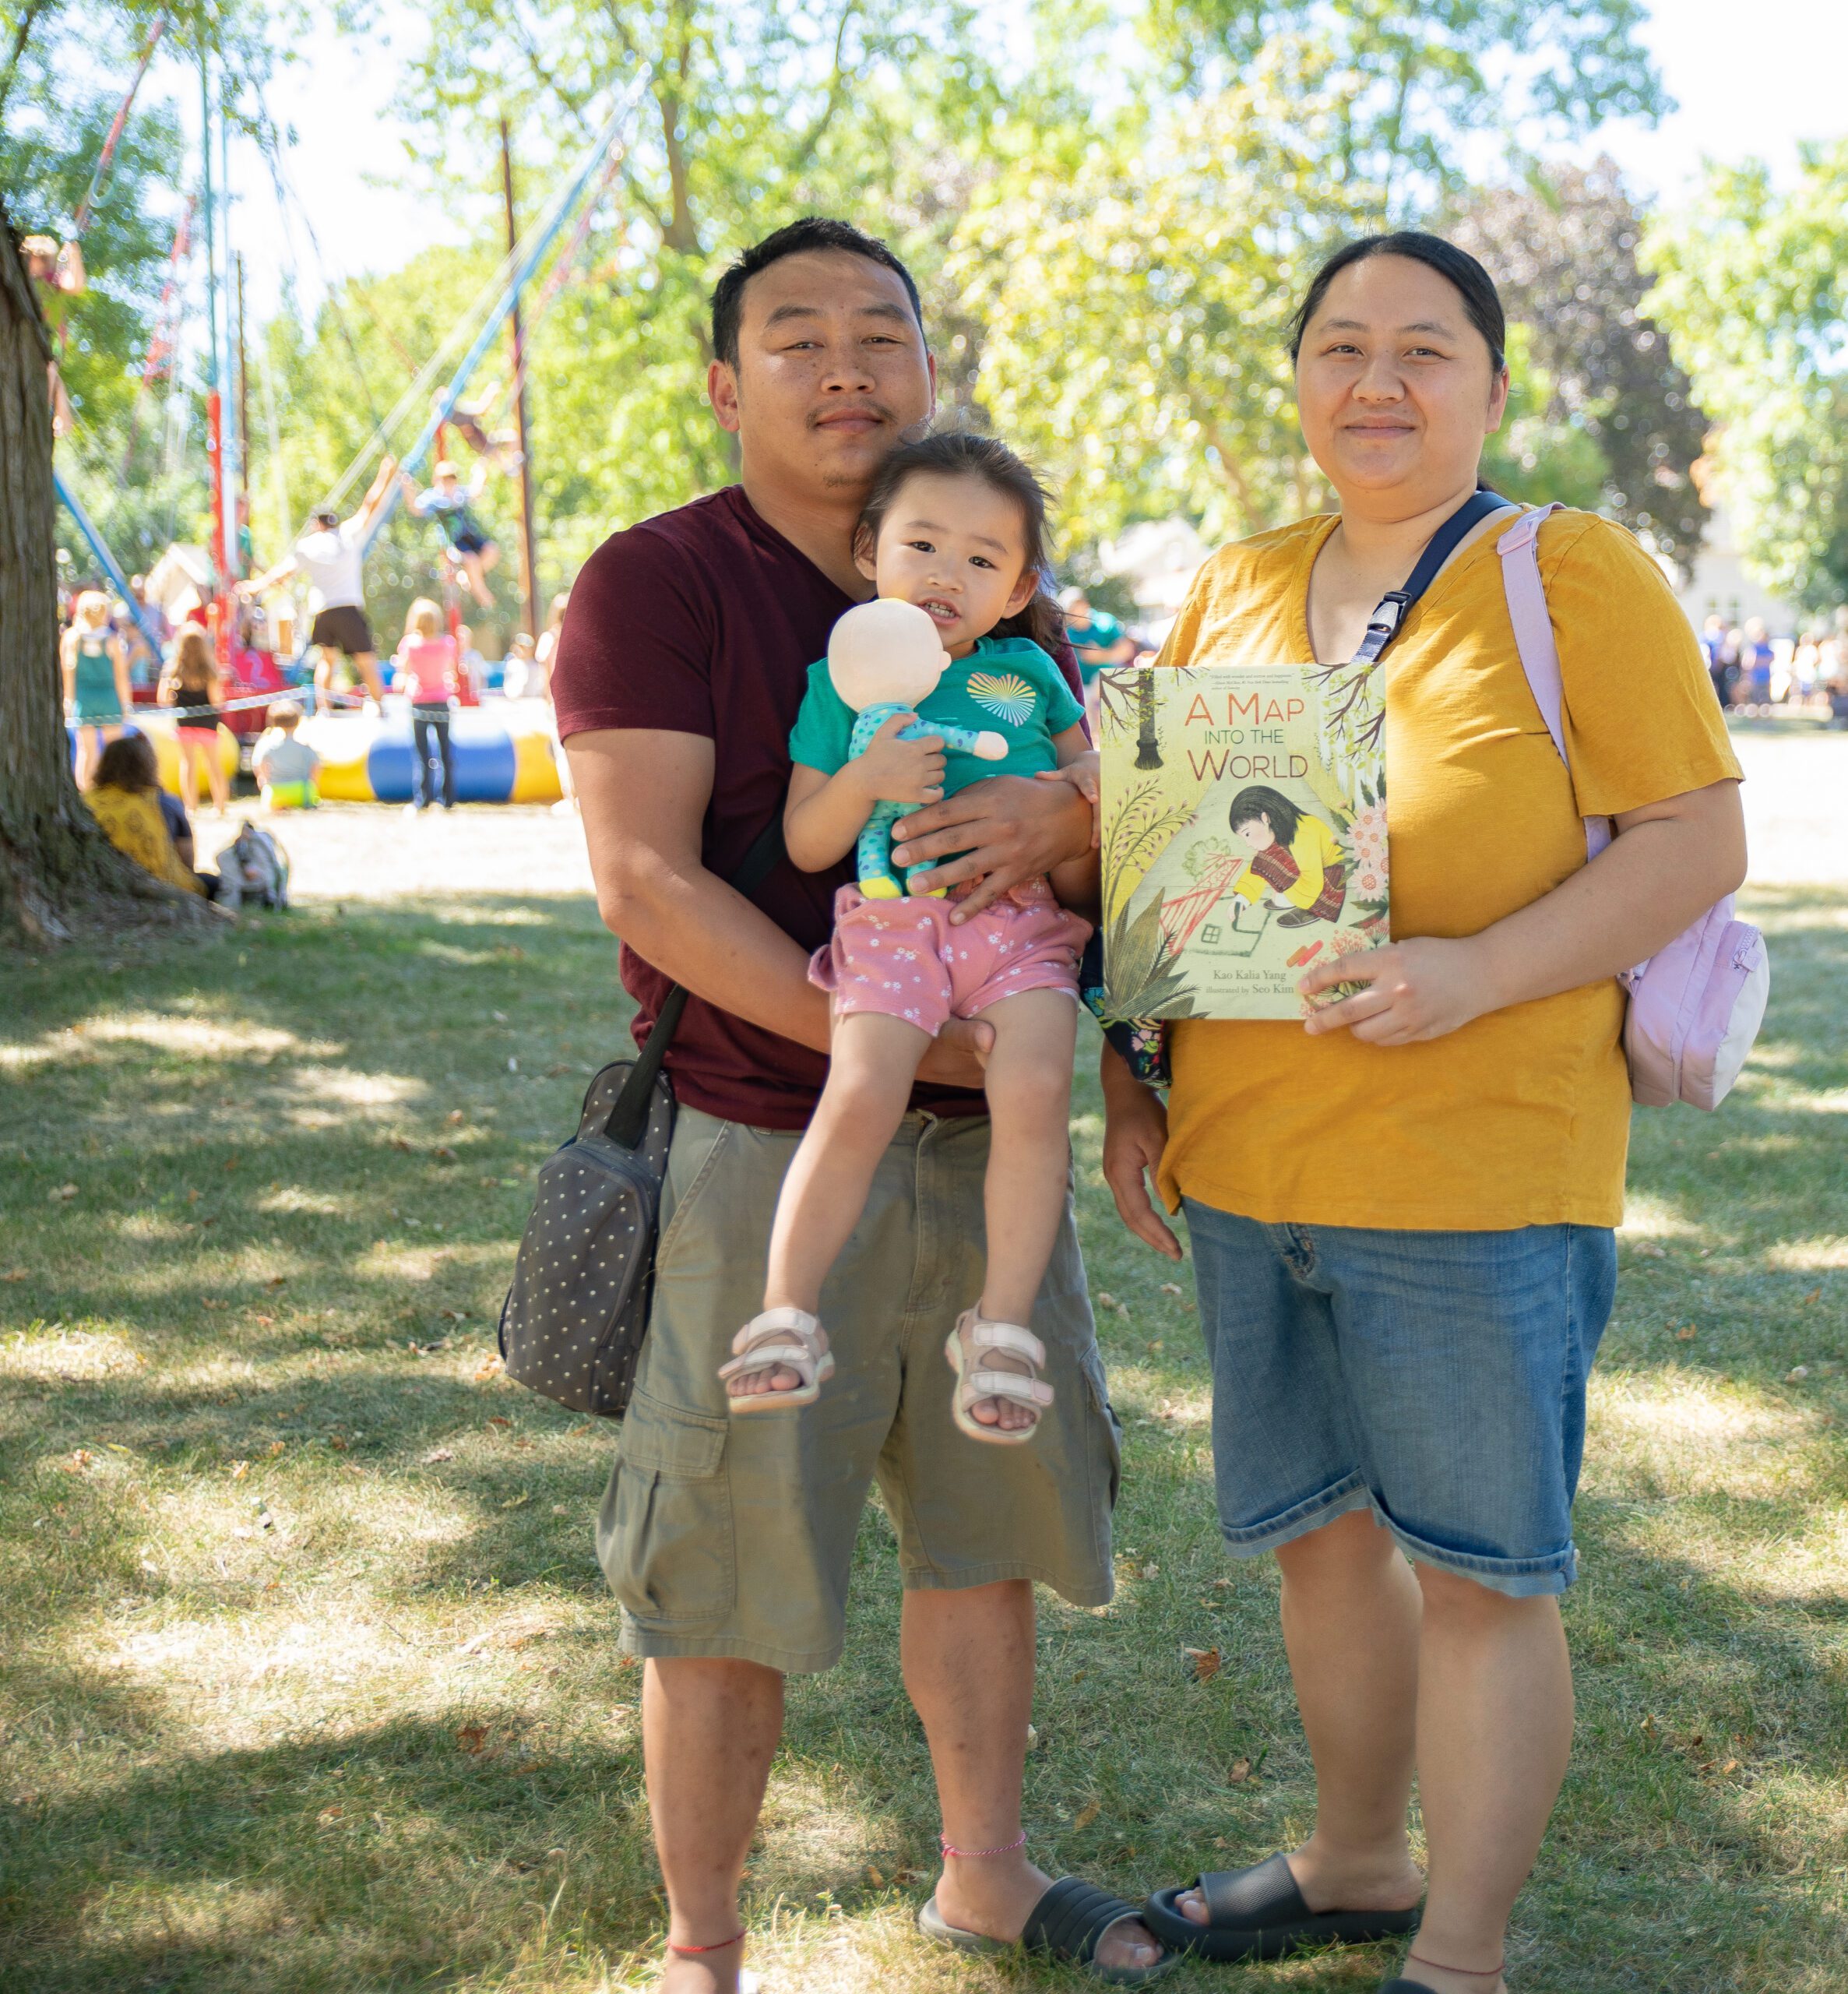 a couple holding their young child and a children's book at an outdoor event